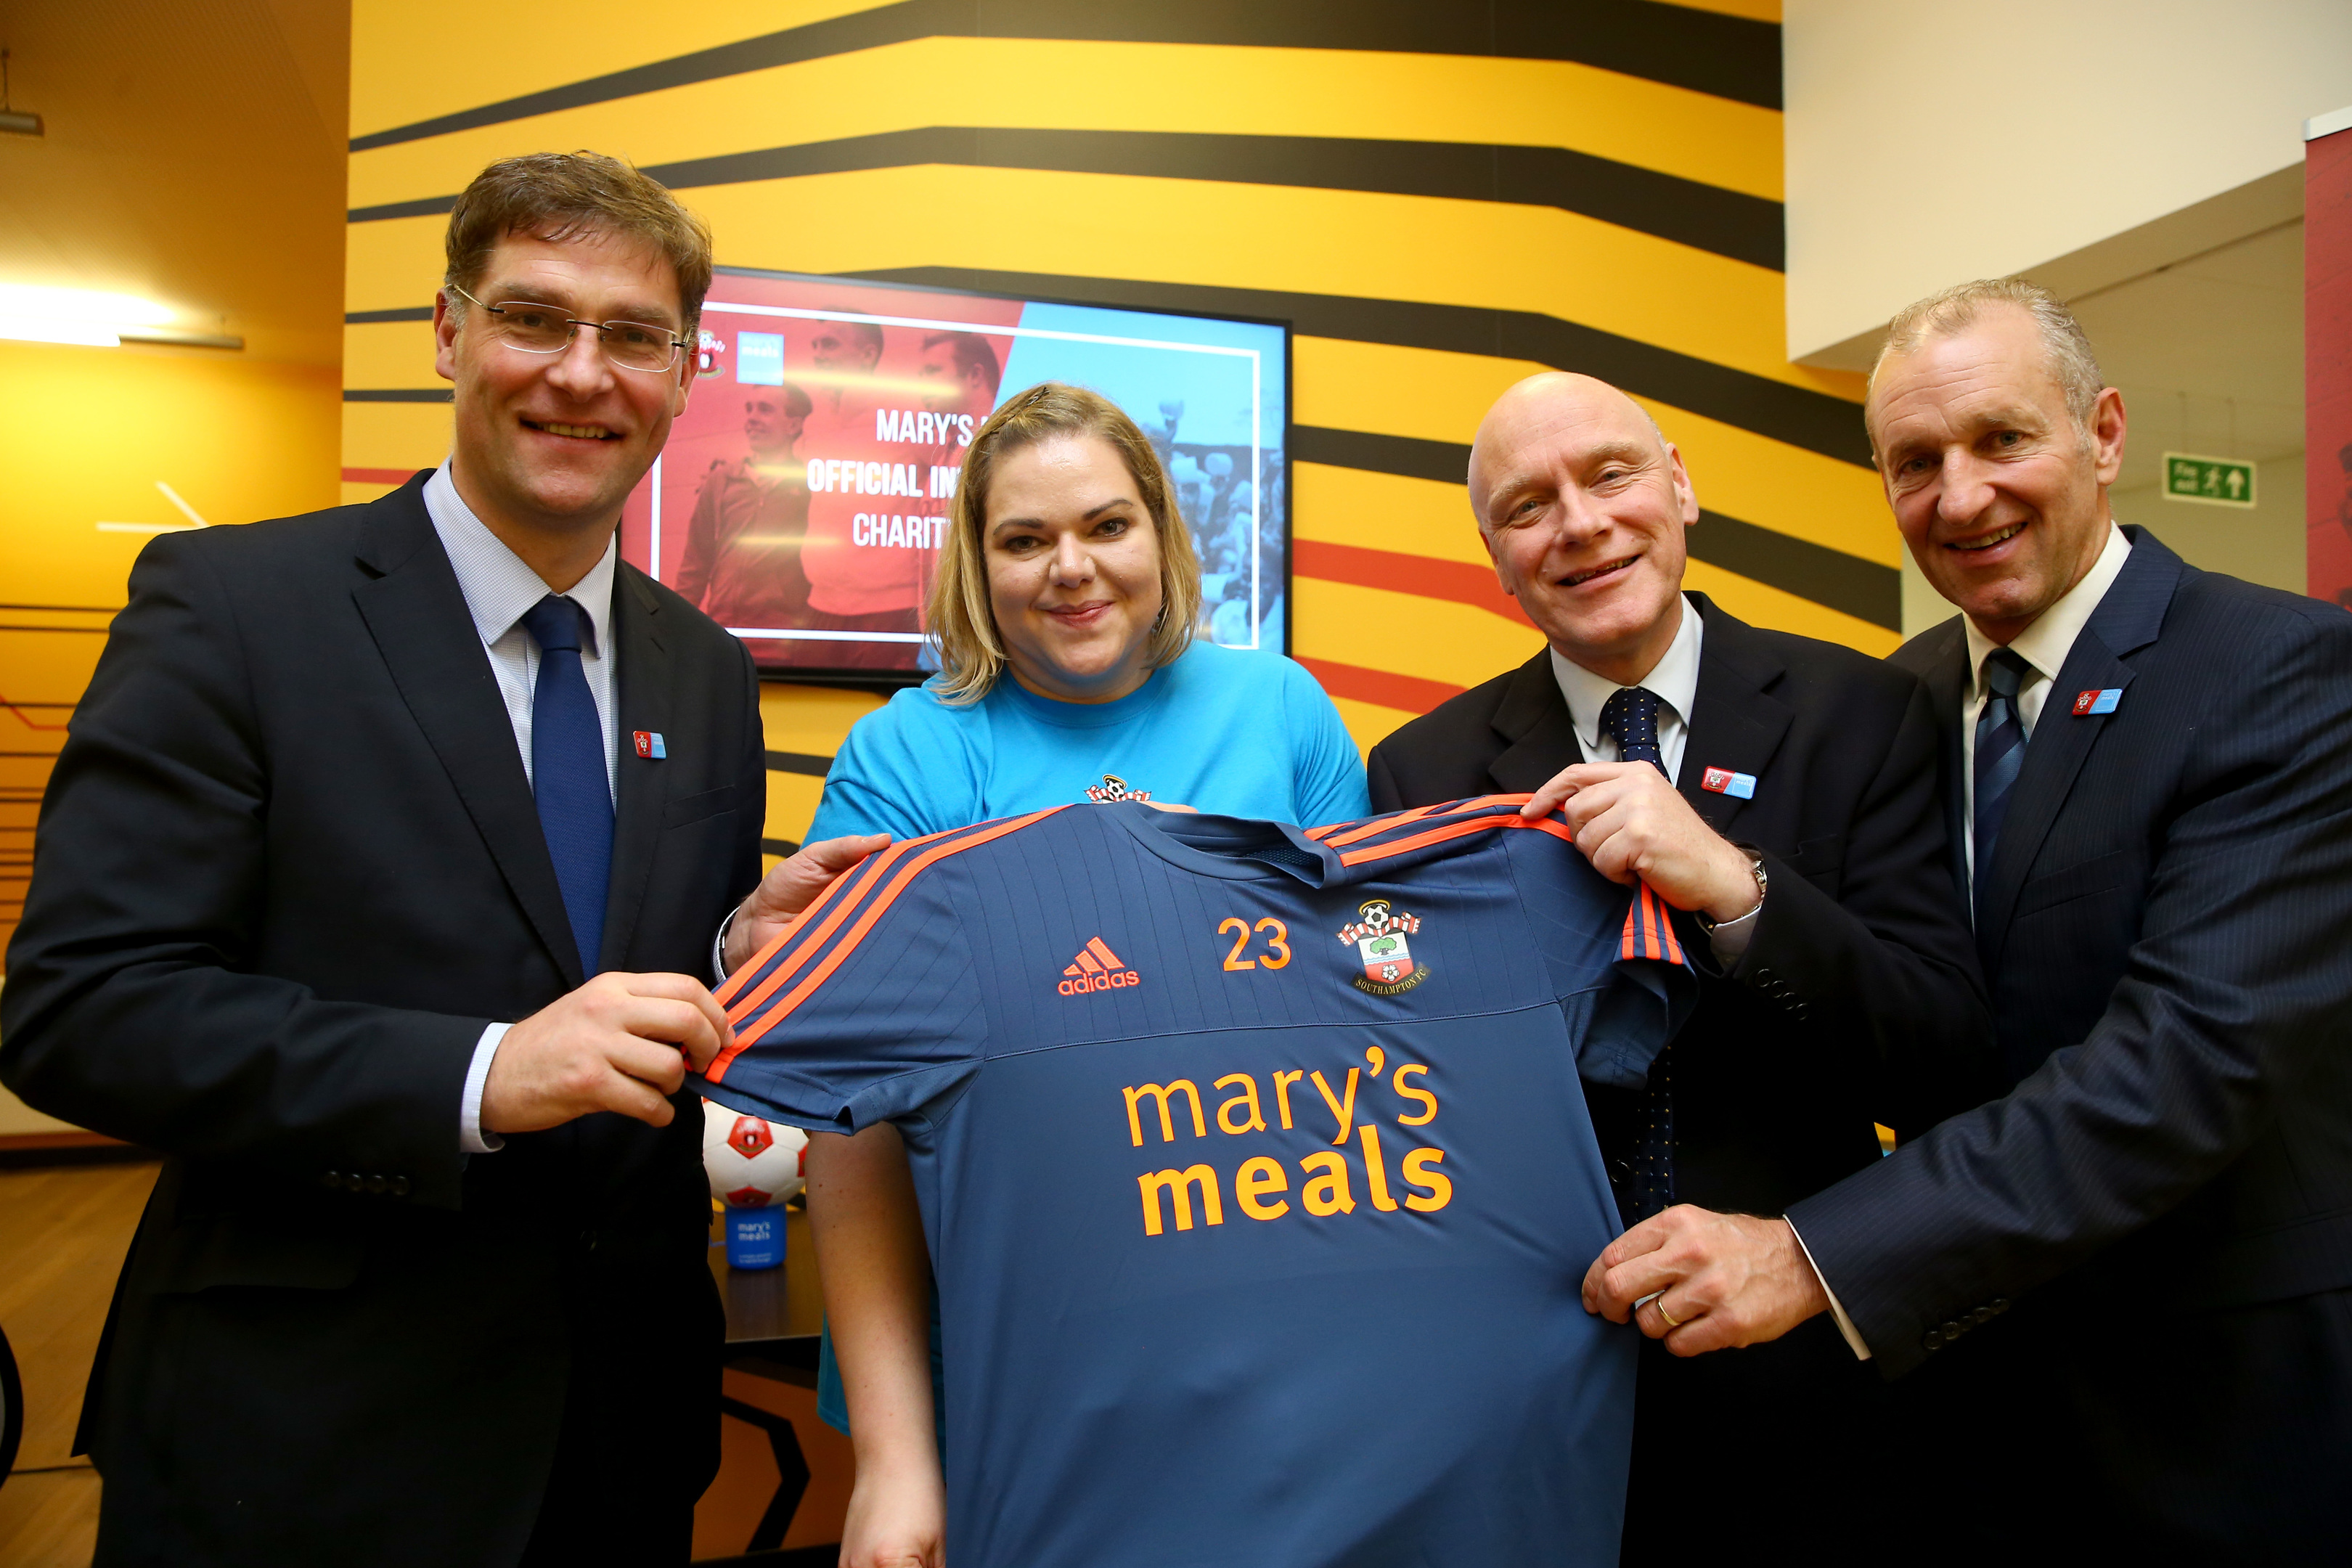 Mary;s Meals launch event at the Staplewood Campus, Southampton, 3rd November 2015